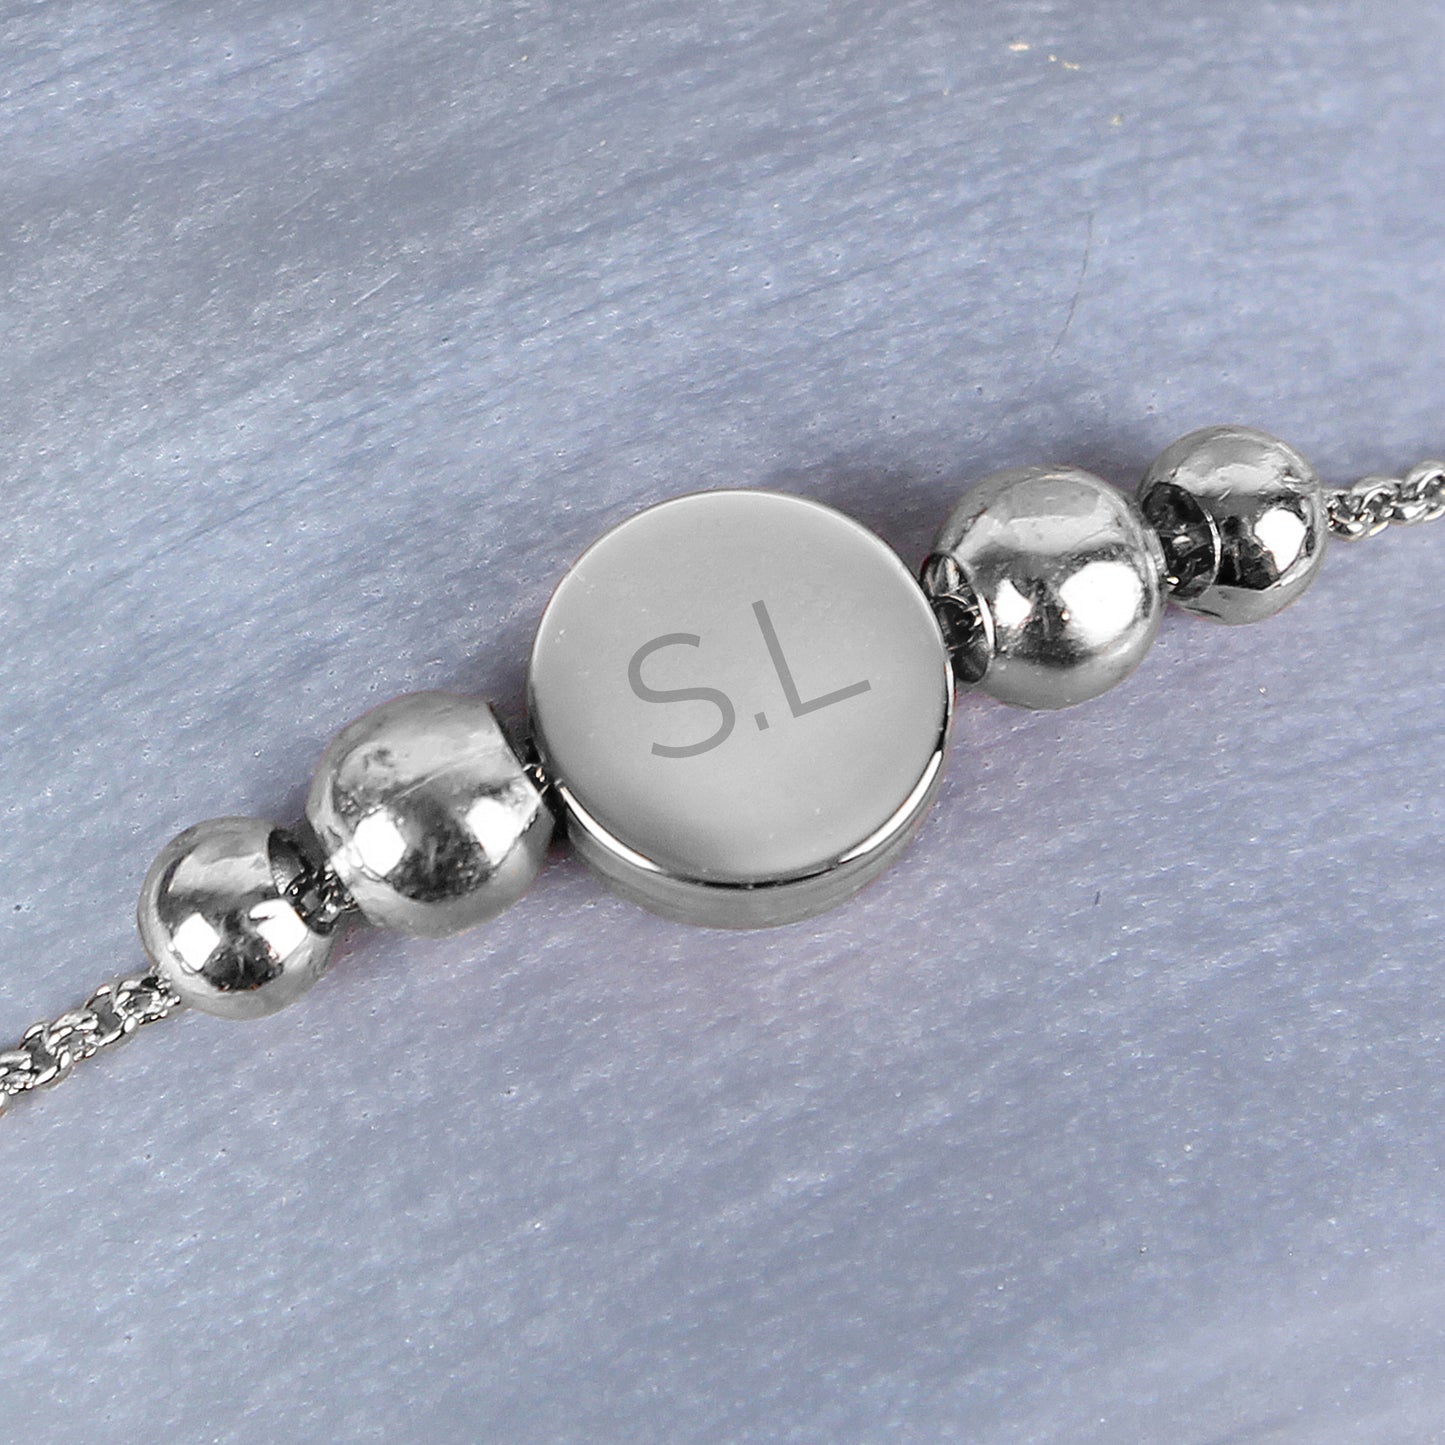 Personalised Silver Plated Initials Disc Bracelet - Personalise It!